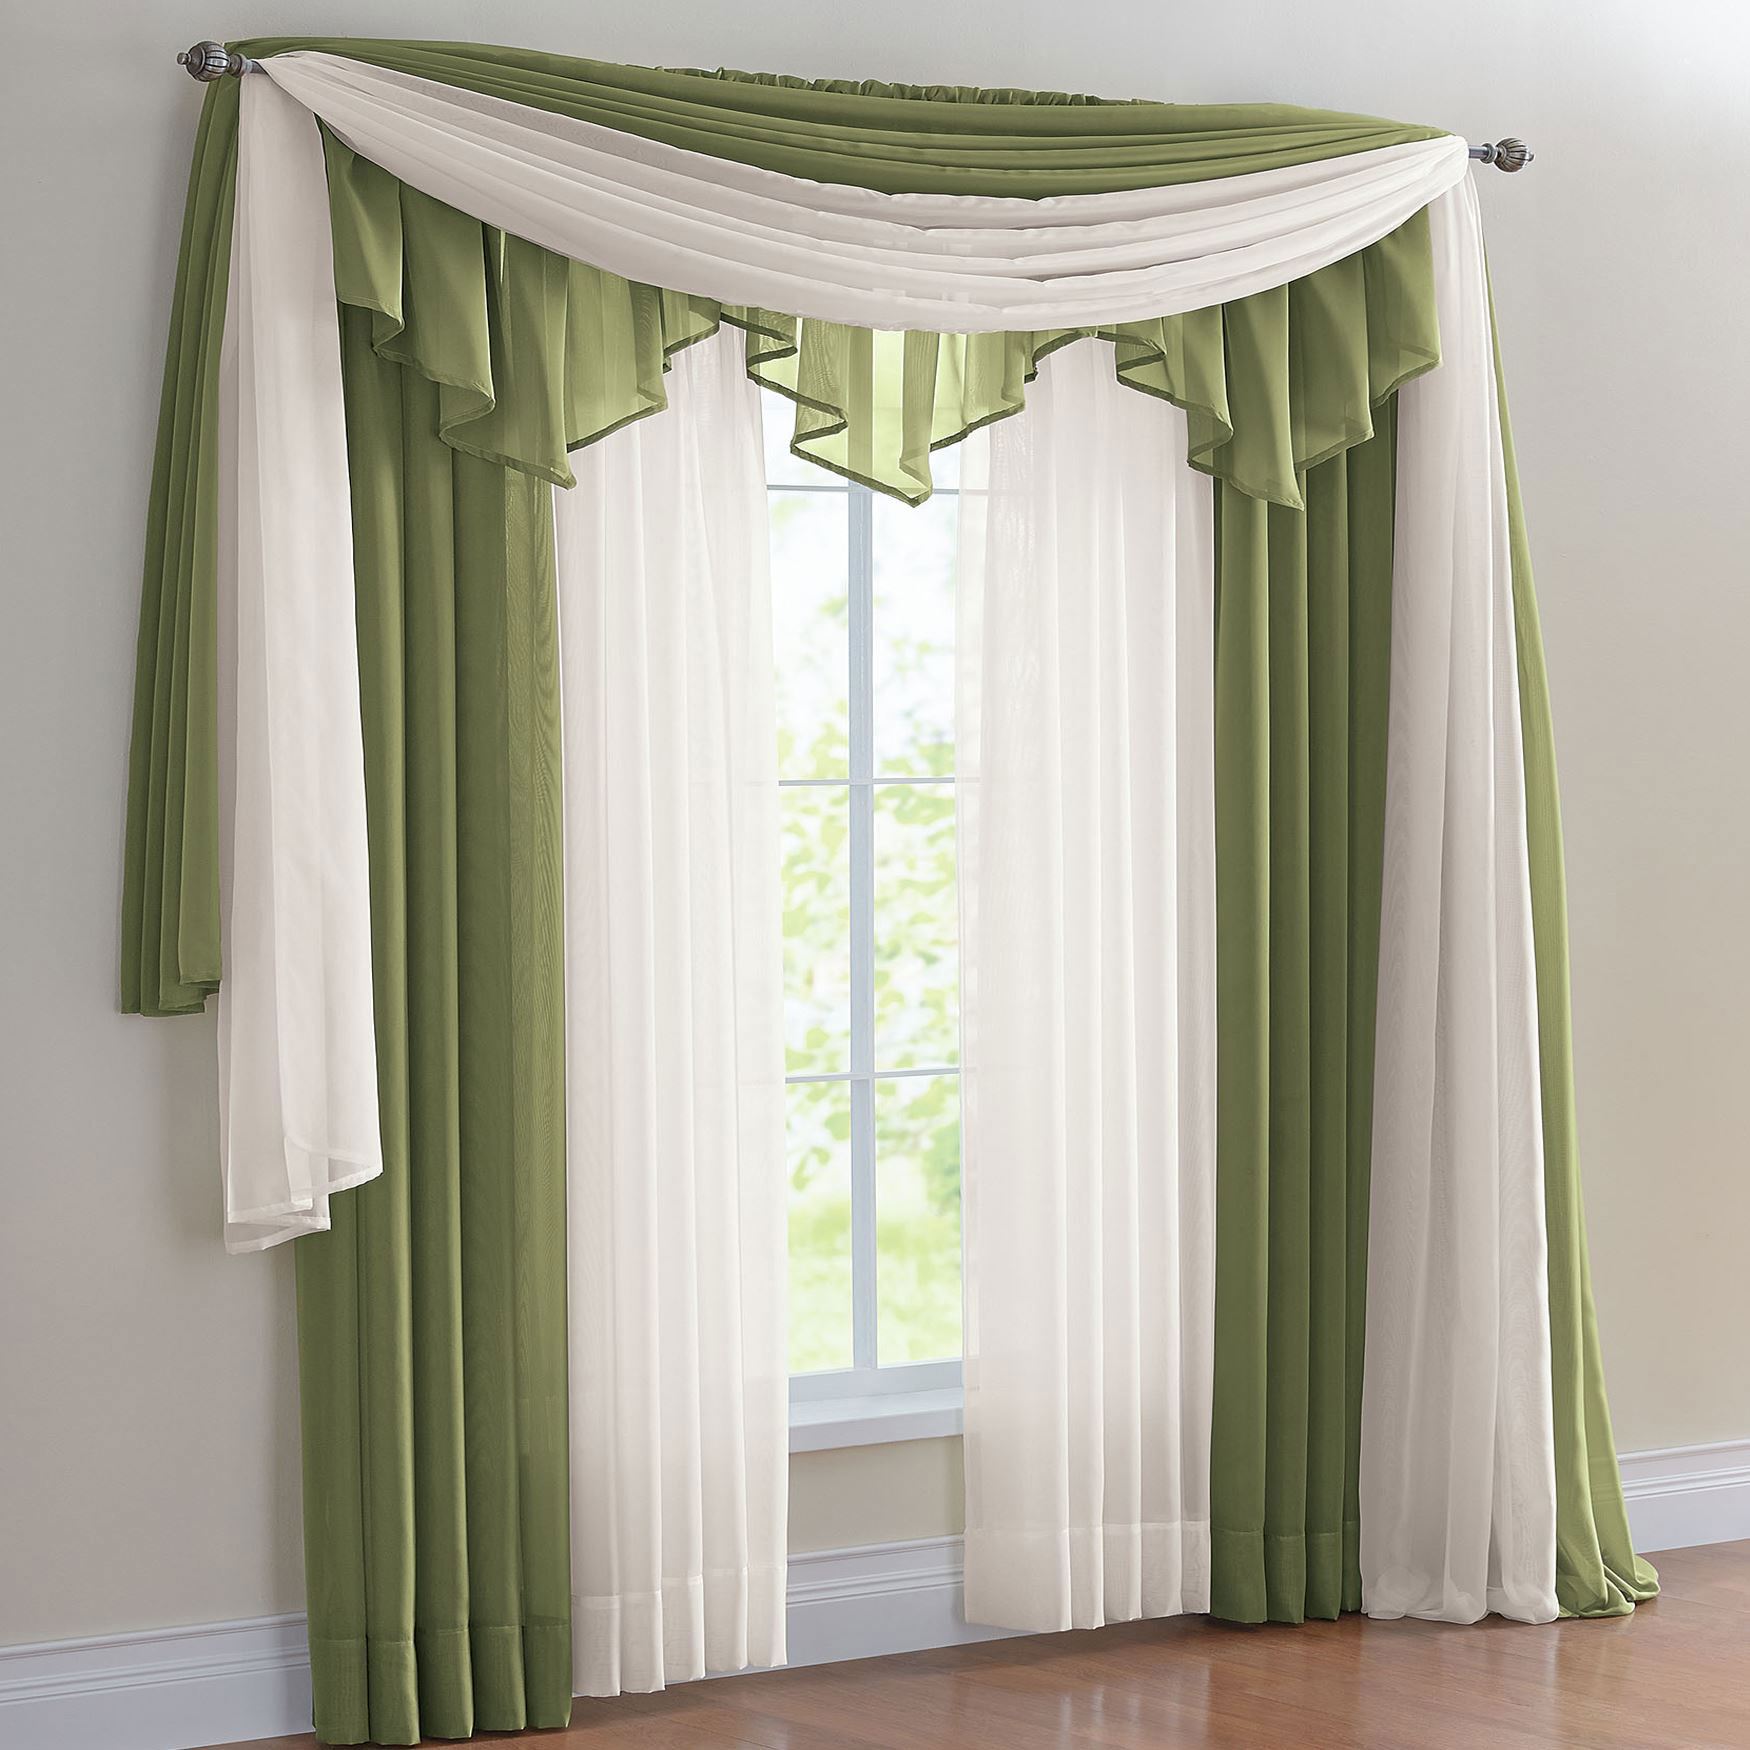 drapes and curtains bh studio® sheer voile ascot valance MYKTLQI